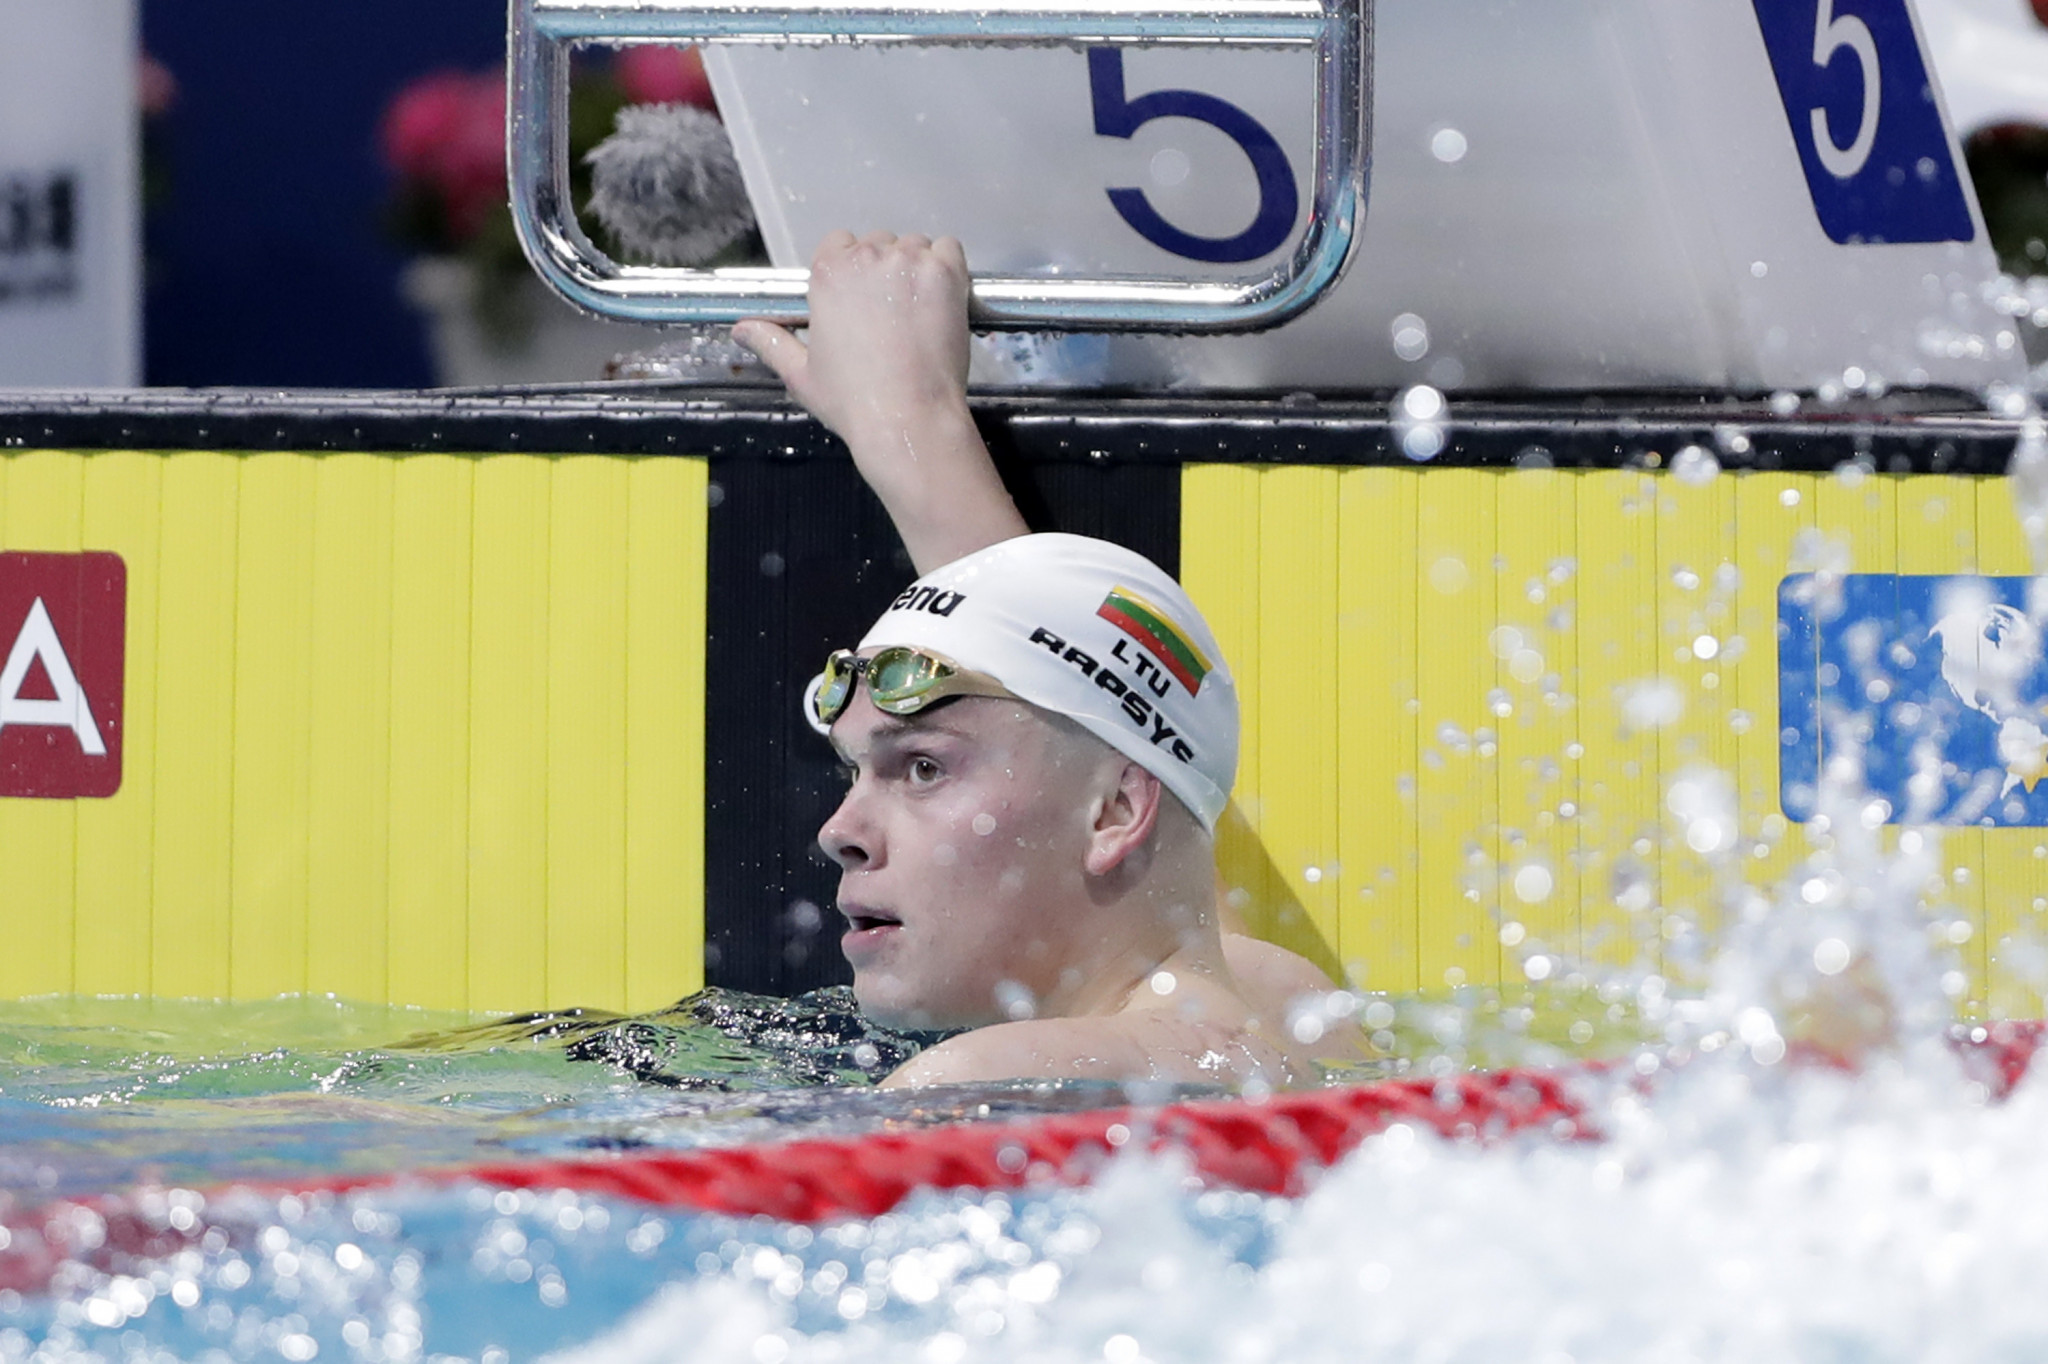  Danas Rapšys of Lithuania won his second gold medal of the FINA Swimming World Cup by claiming the men's 200m title in Tokyo ©Getty Images